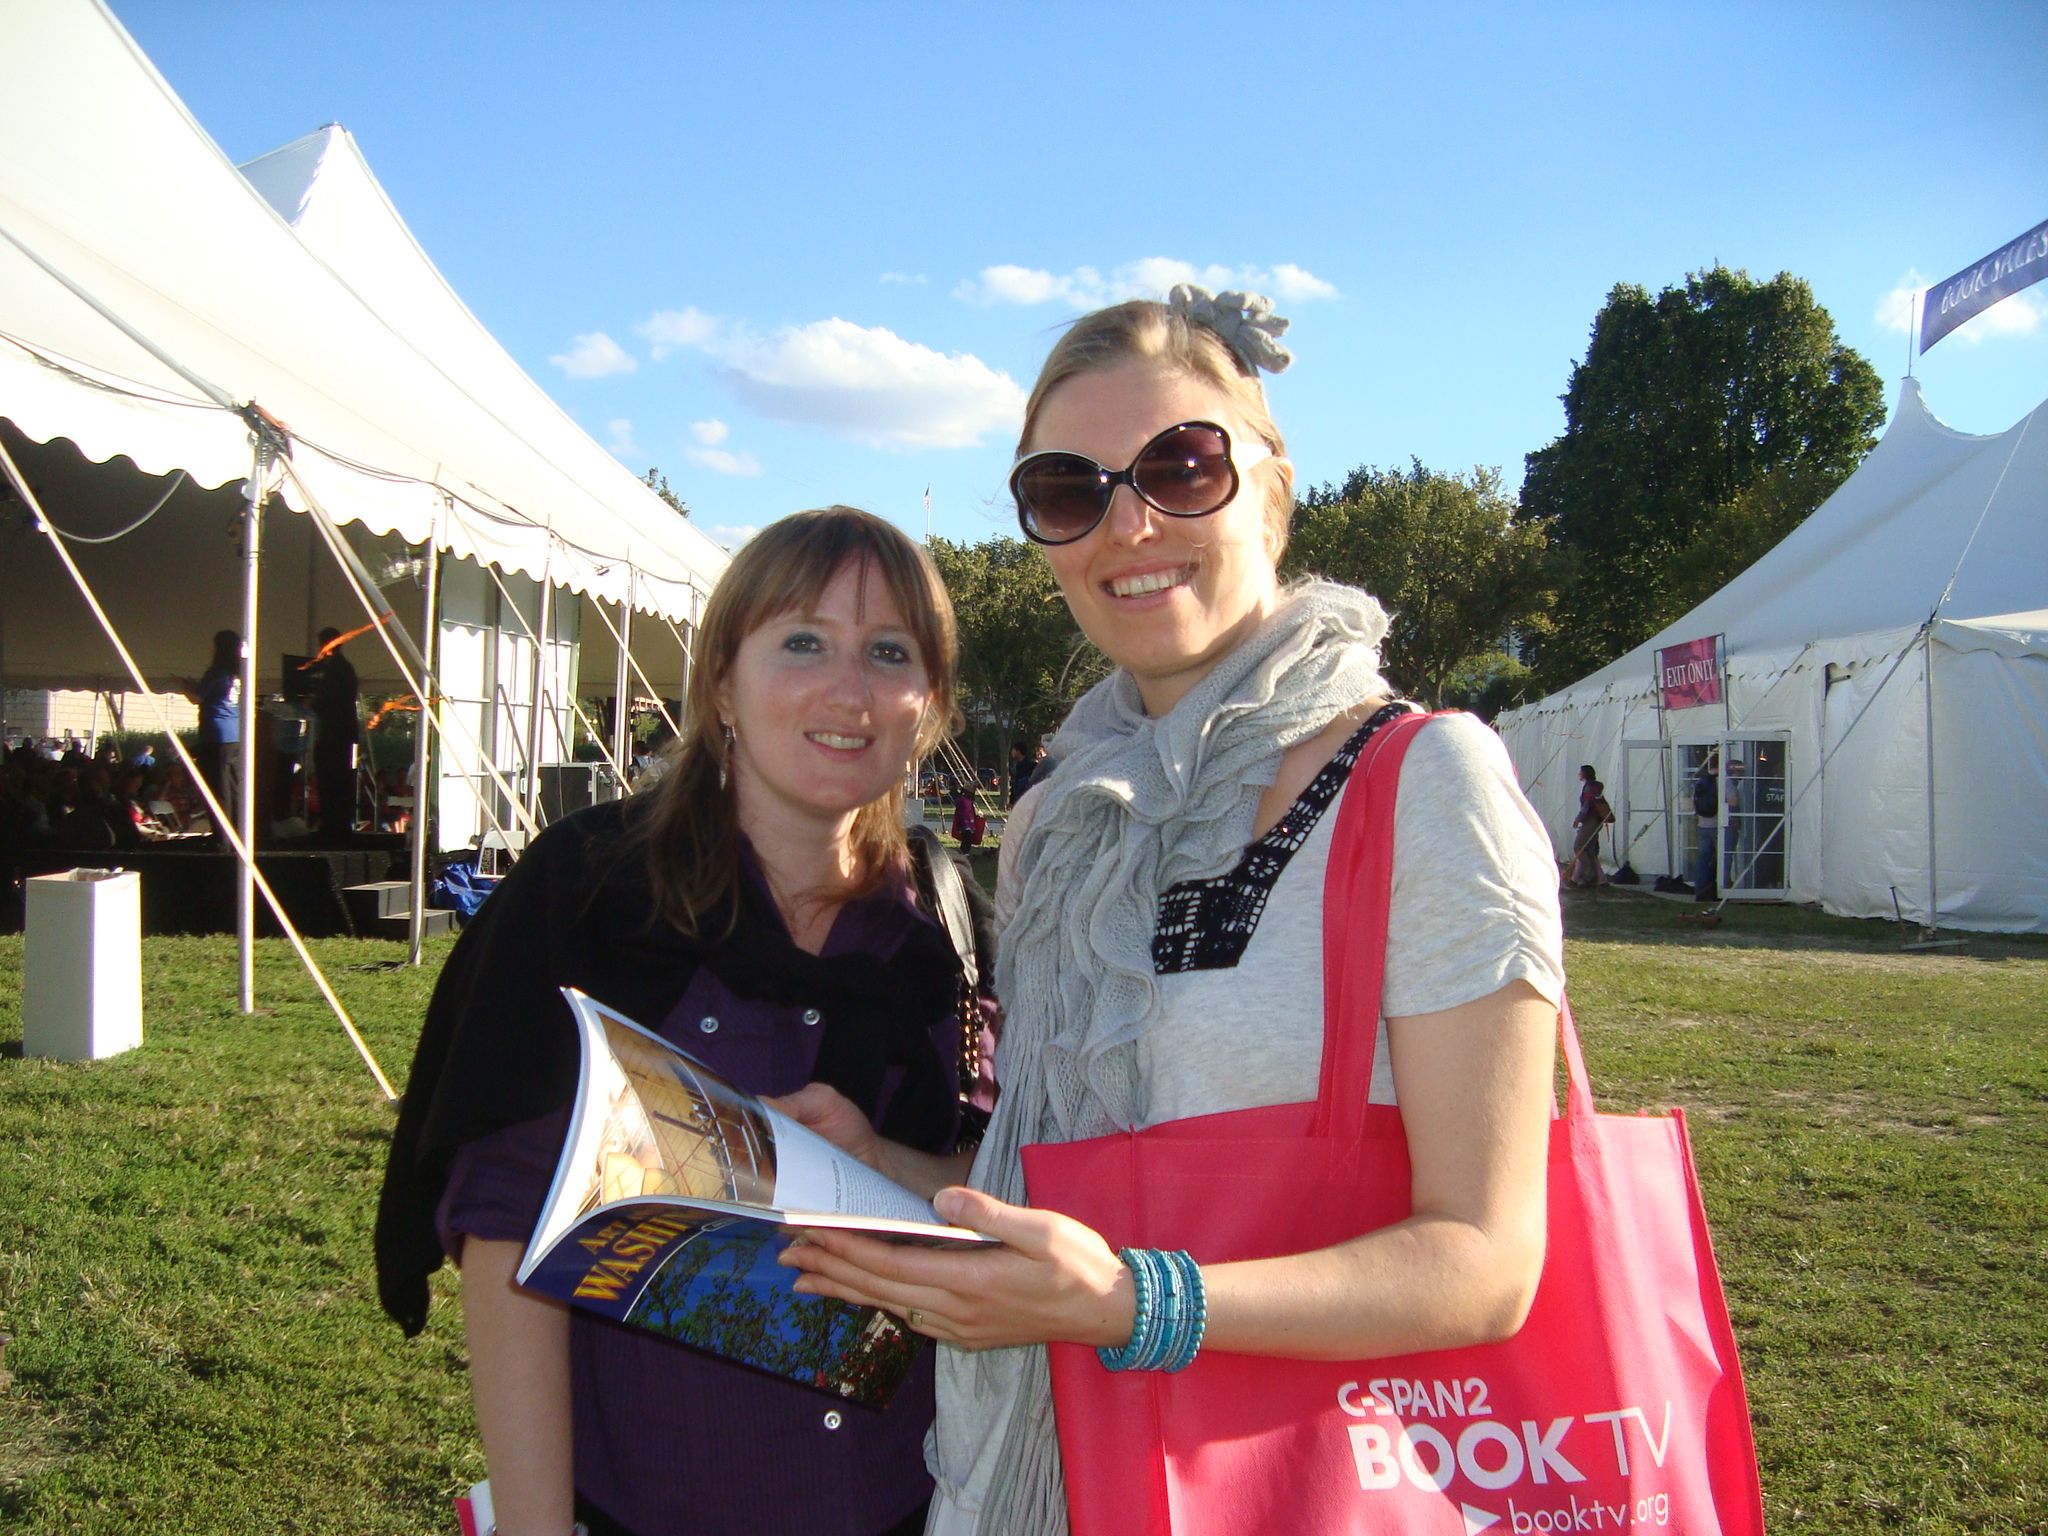 Inside the 12th Annual National Book Festival